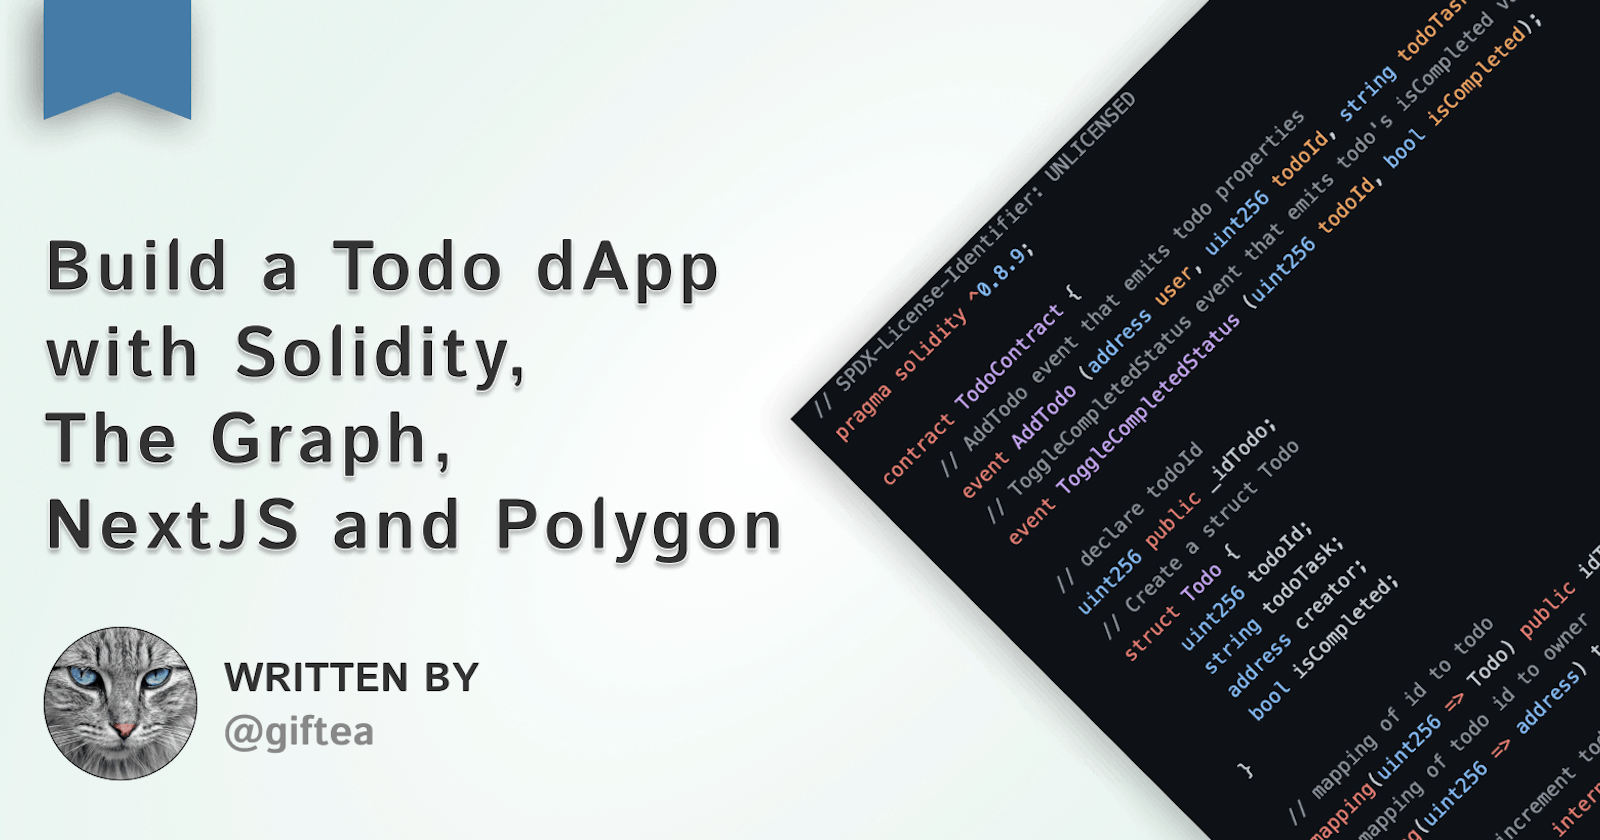 Build a Todo dApp with Solidity, The Graph, NextJS, and Polygon